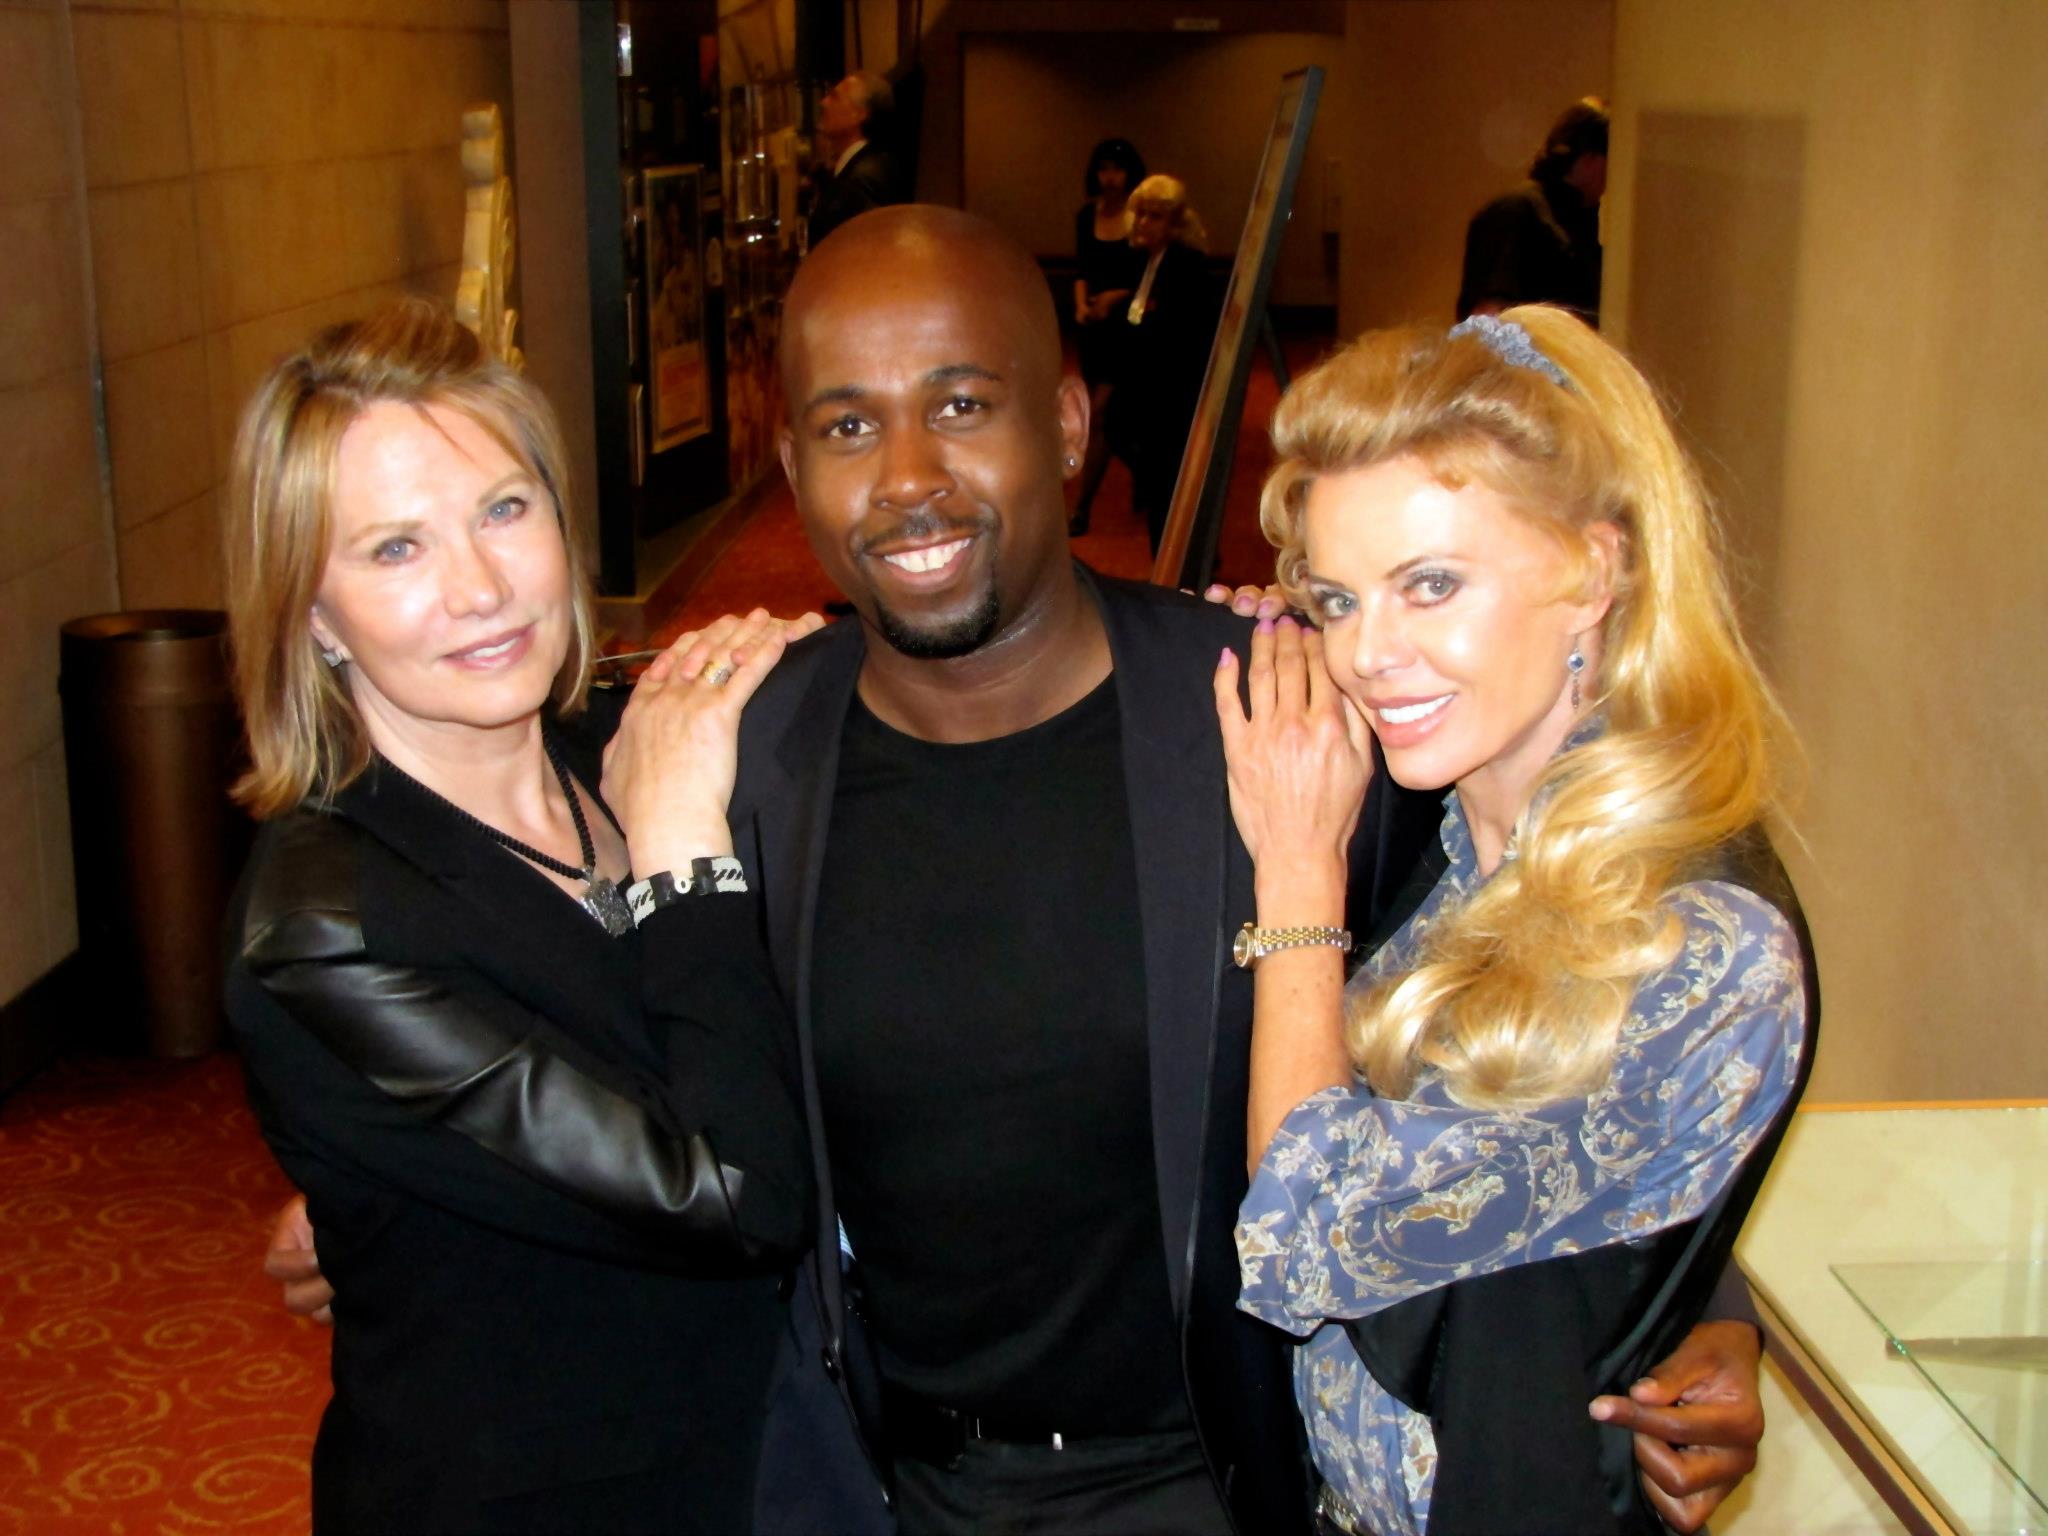 Tegan Summer with friend Kristina Wayborn and Maud Adams, Magda and the title character respectively in James Bond's 